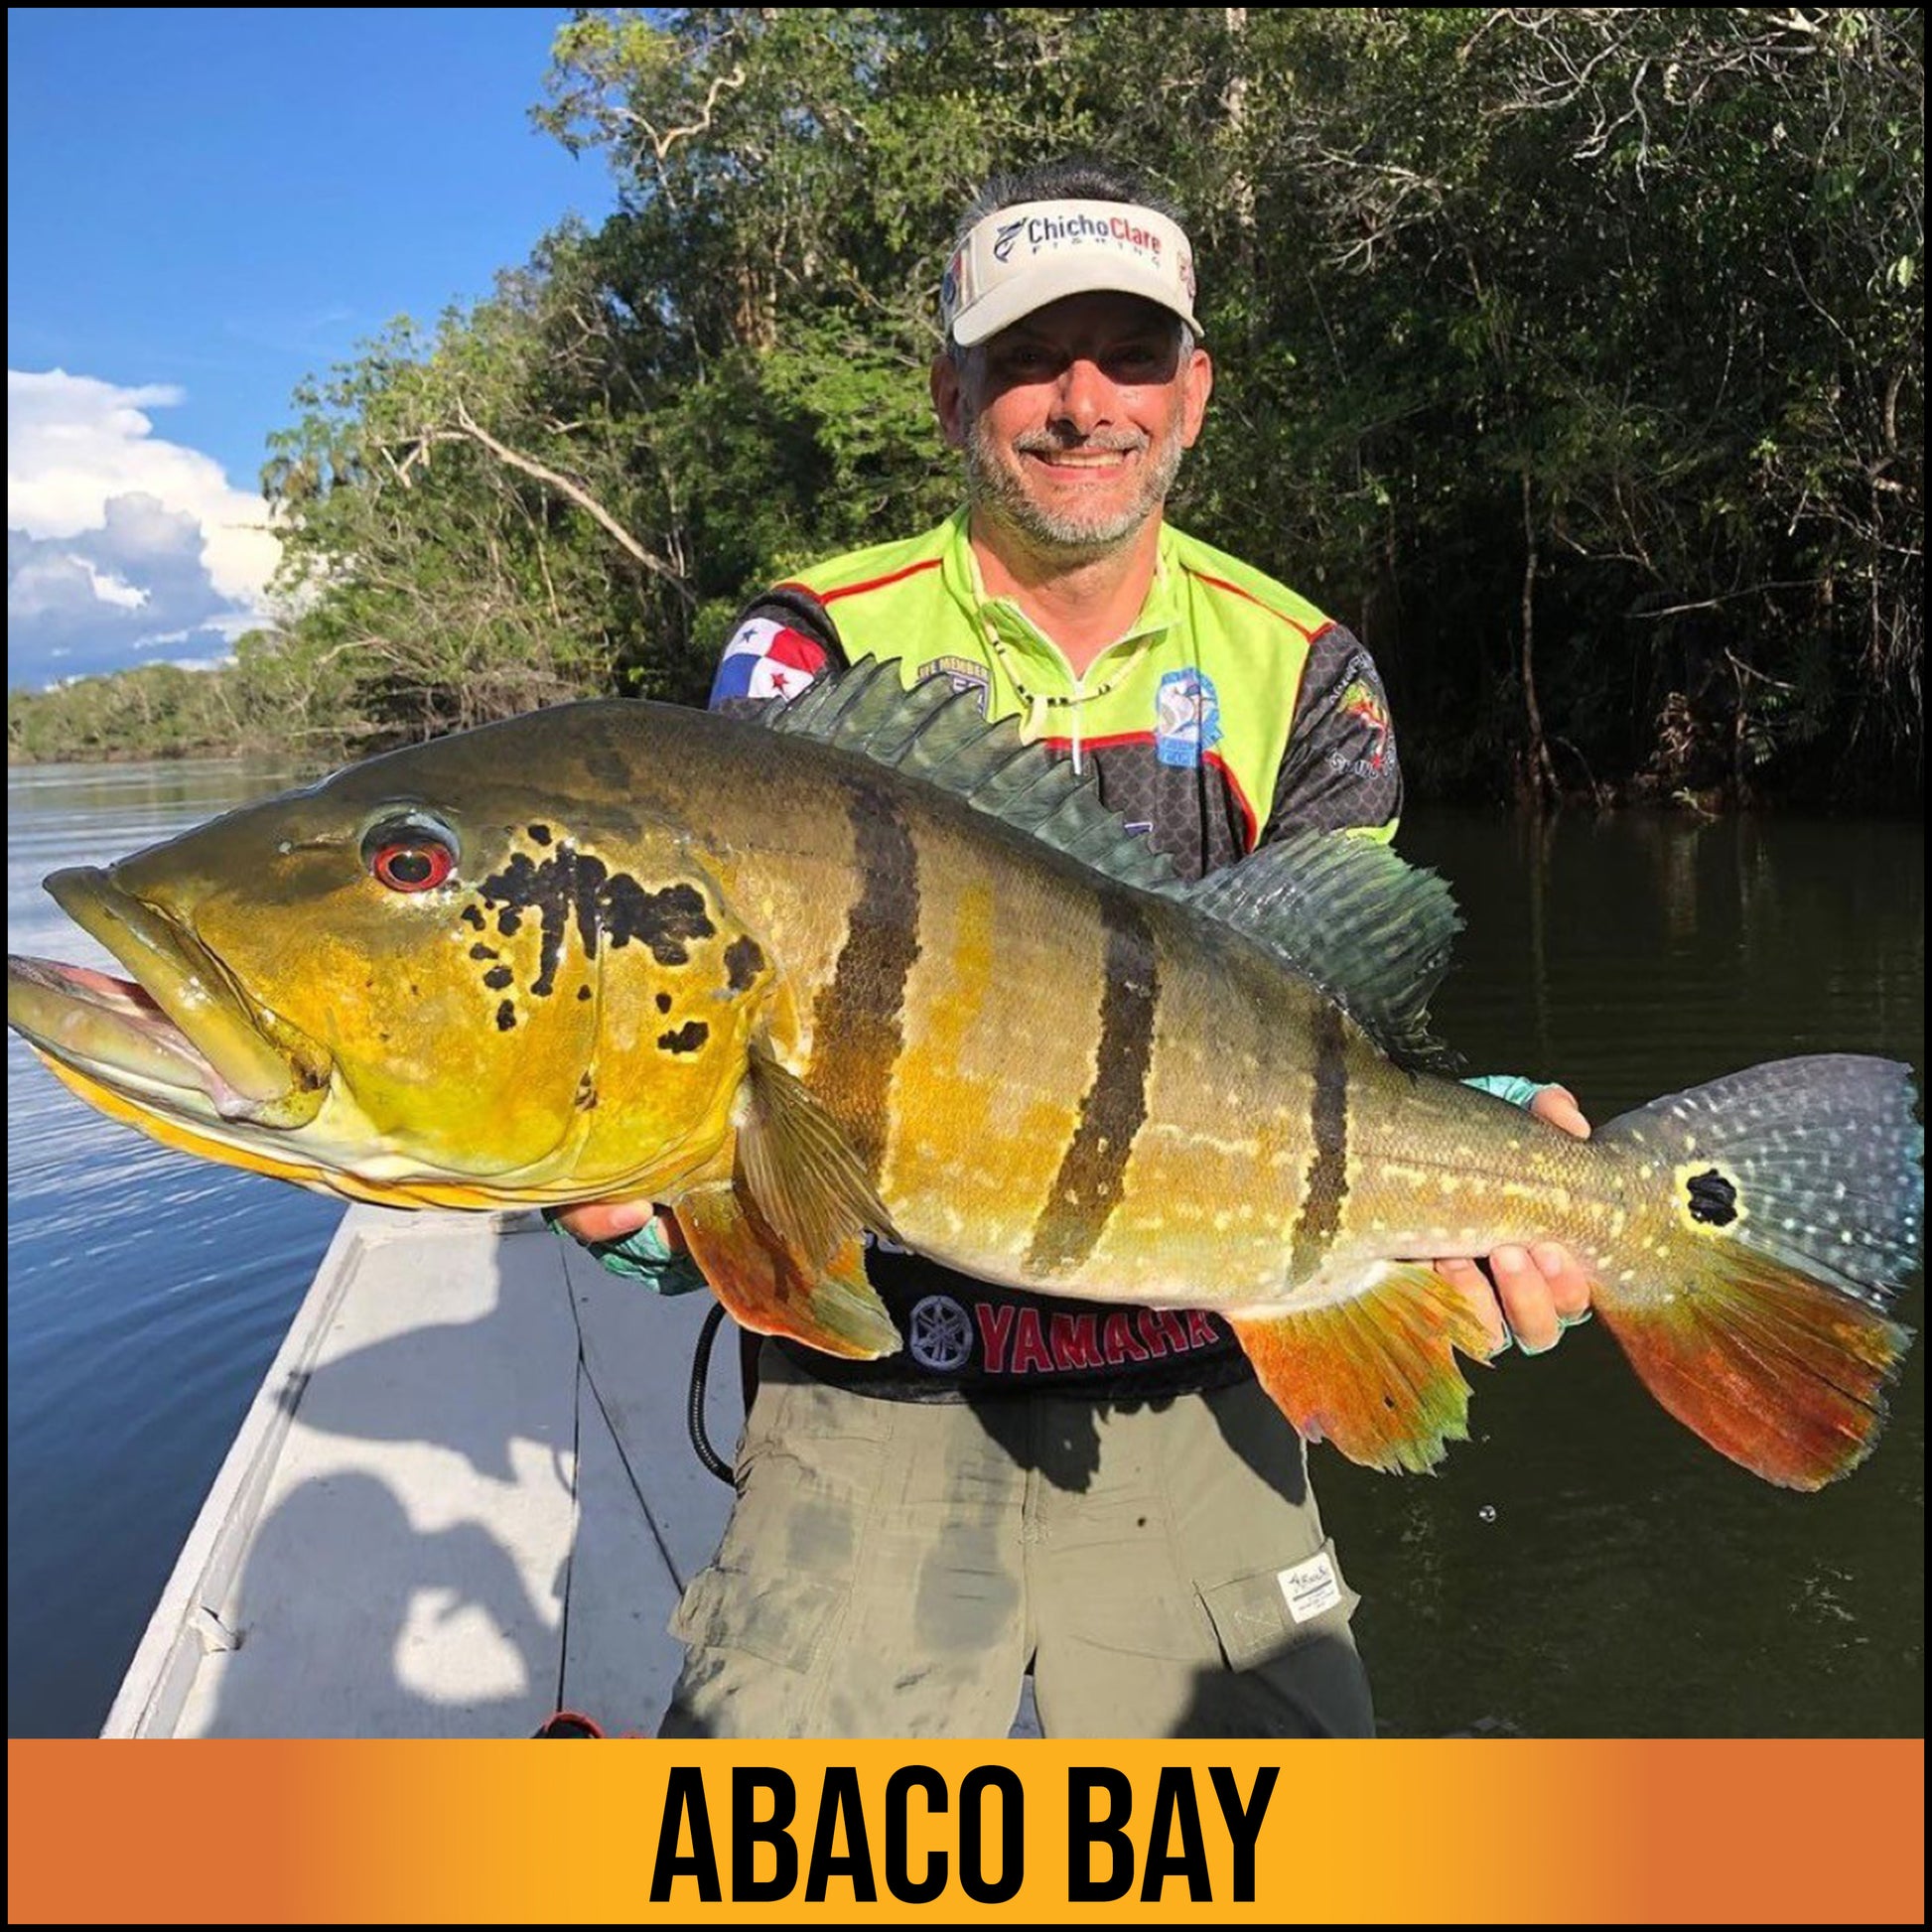 The Abaco Bay Sun Glove is the most popular model in our sun protection line. Independently tested and verified, it is rated at the maximum protection of UPF 50+. Providing both hand and wrist protection, this glove is great for any of your outdoor adventures.